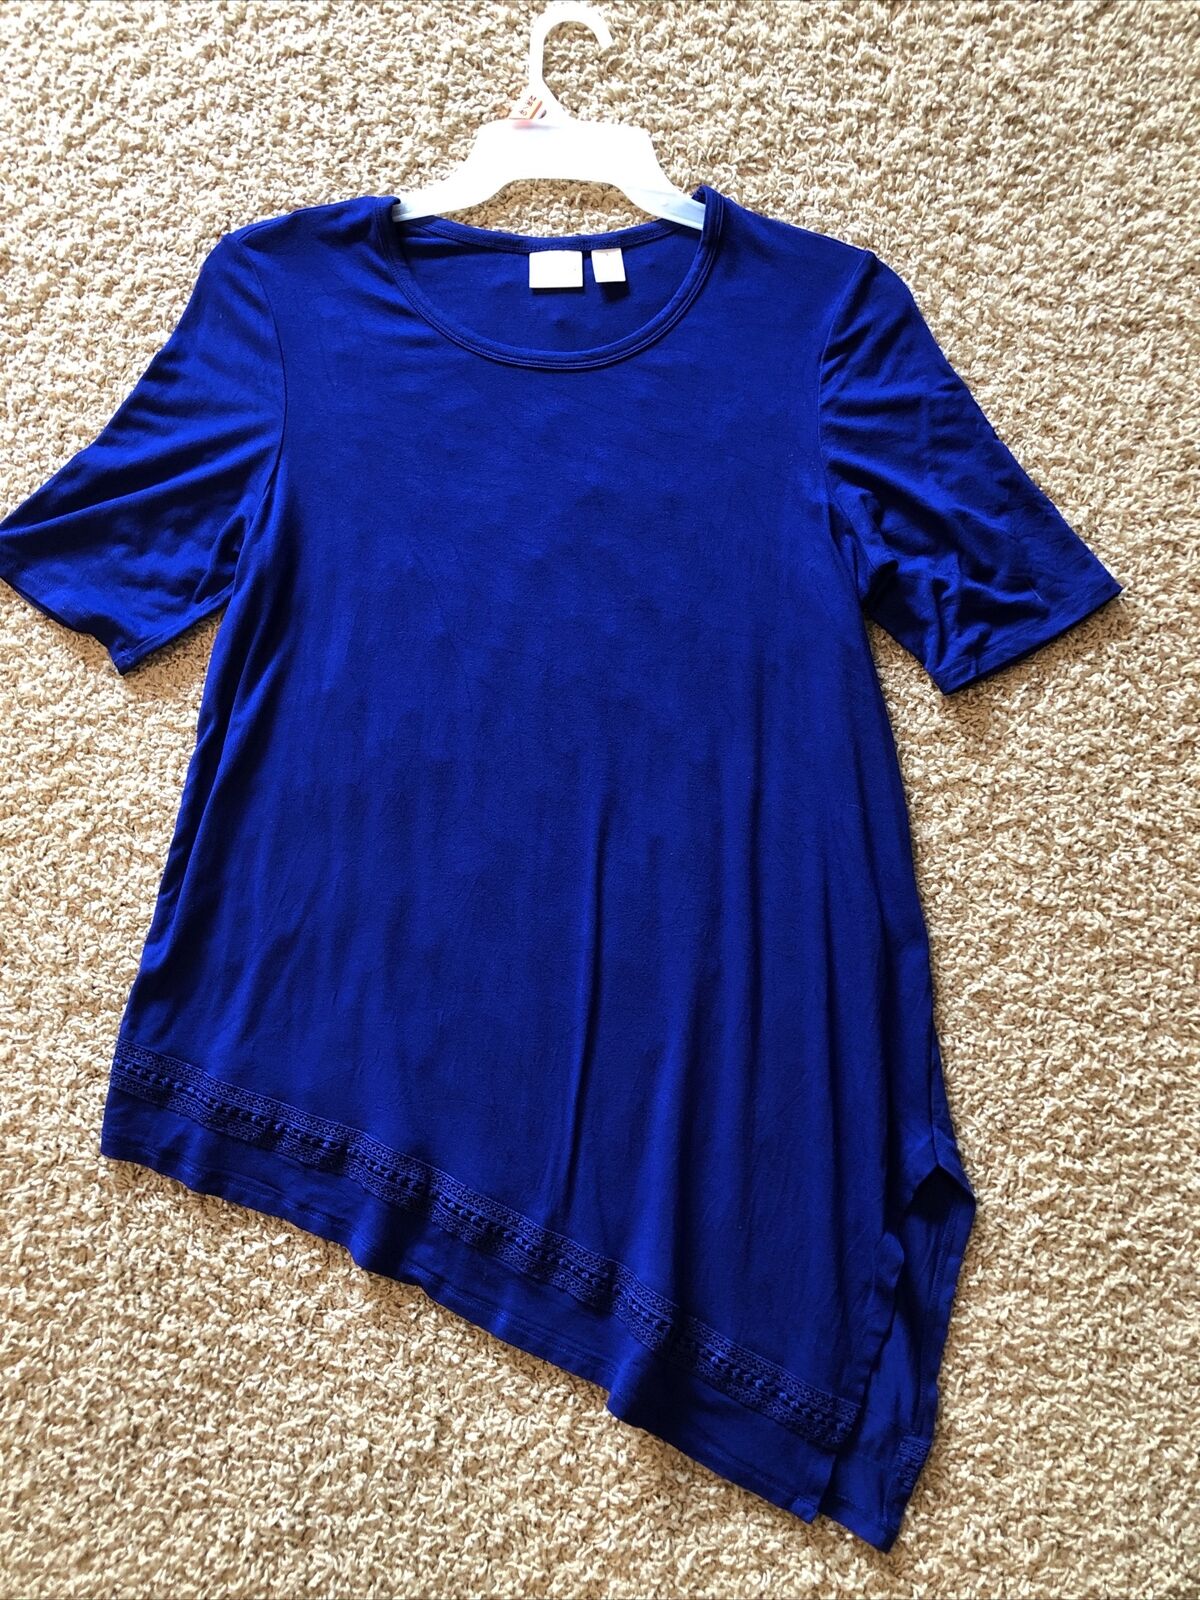 Womens Chicos Size 1 Royal Blue Top With Assymmetrical Bottom